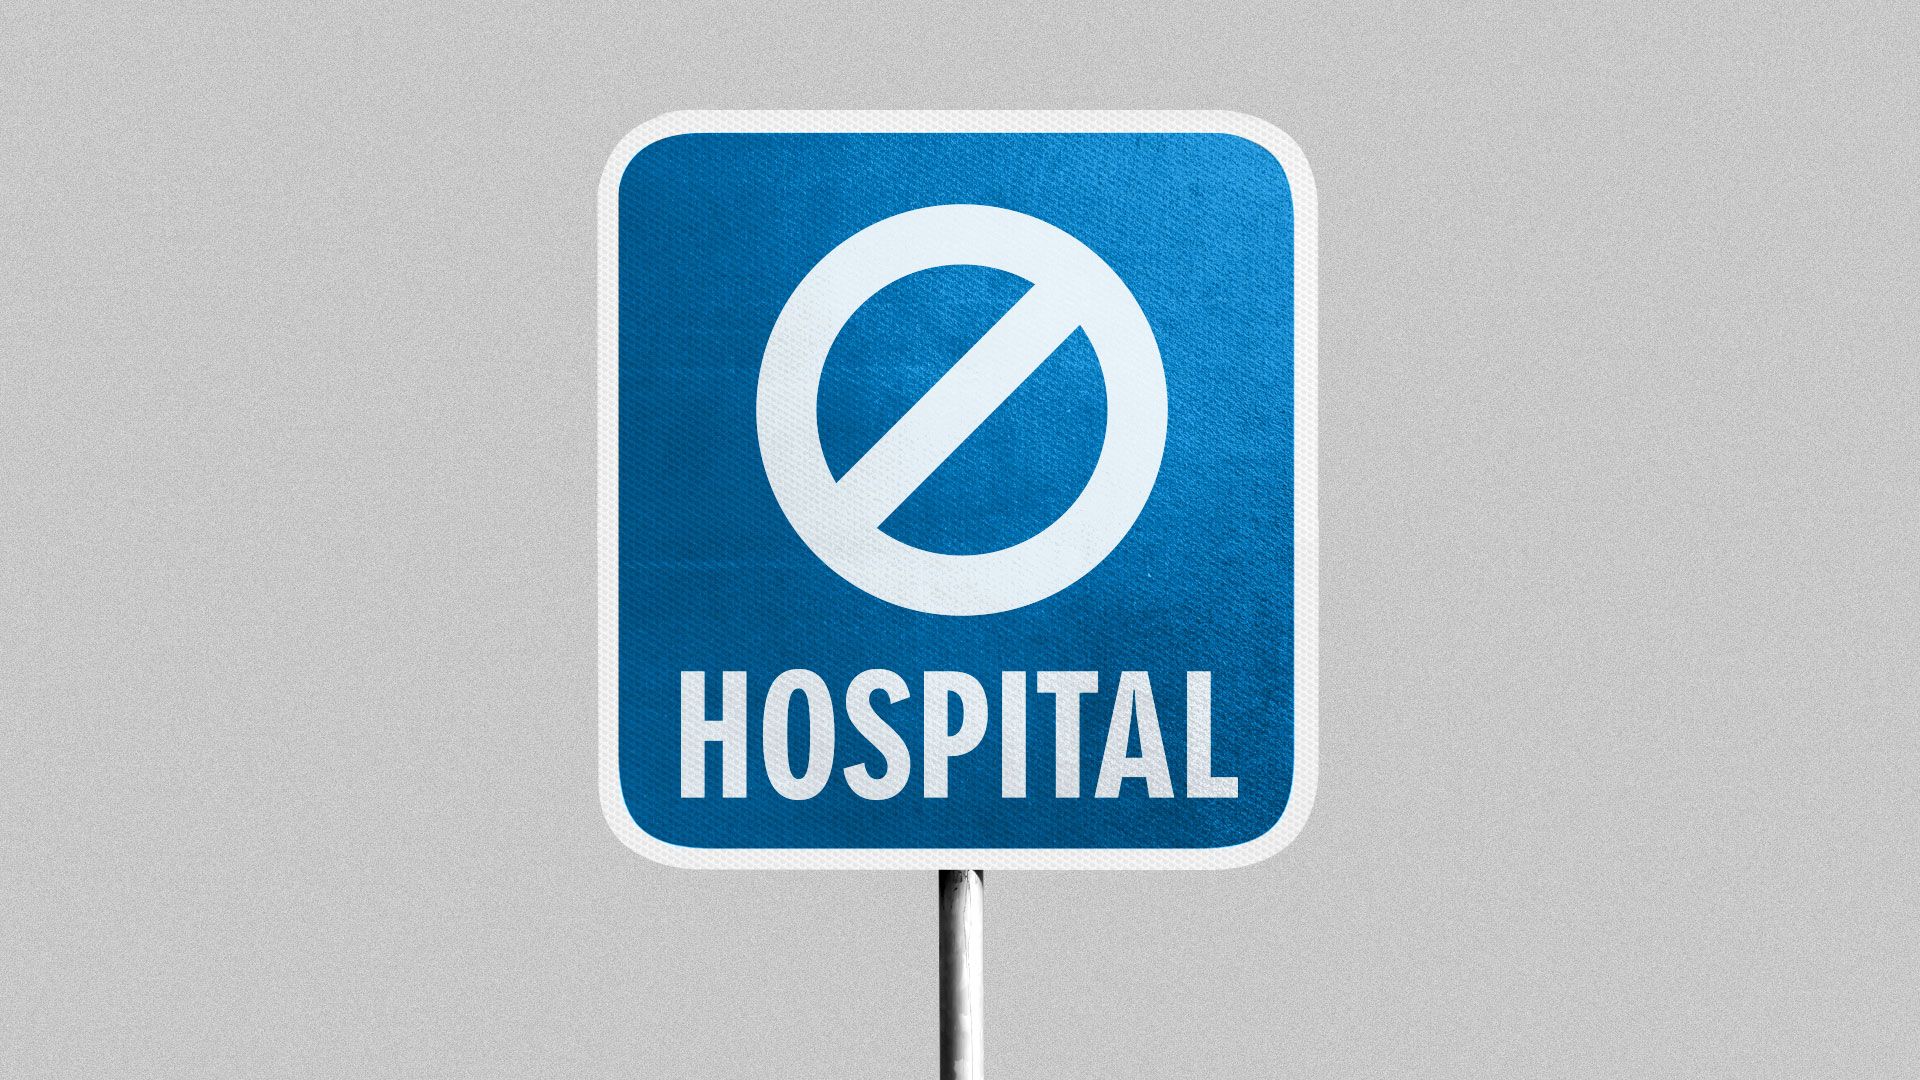 Illustration of hospital sign with cross-out replacing the large H.